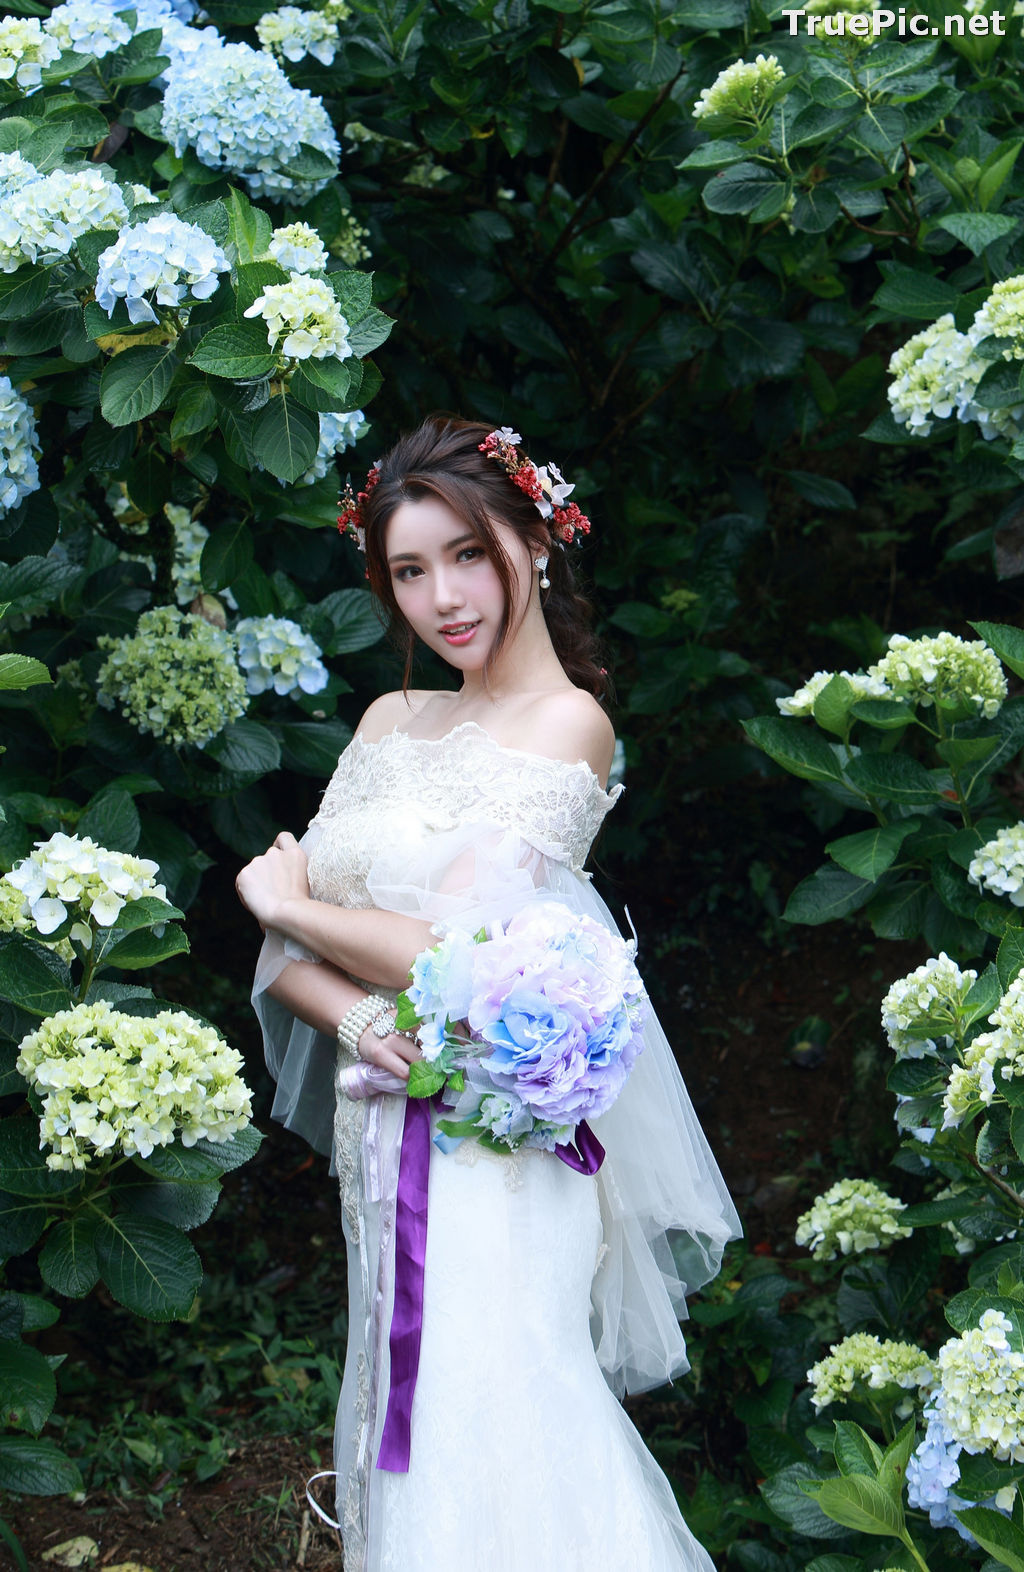 Image Taiwanese Model - 張倫甄 - Beautiful Bride and Hydrangea Flowers - TruePic.net - Picture-25